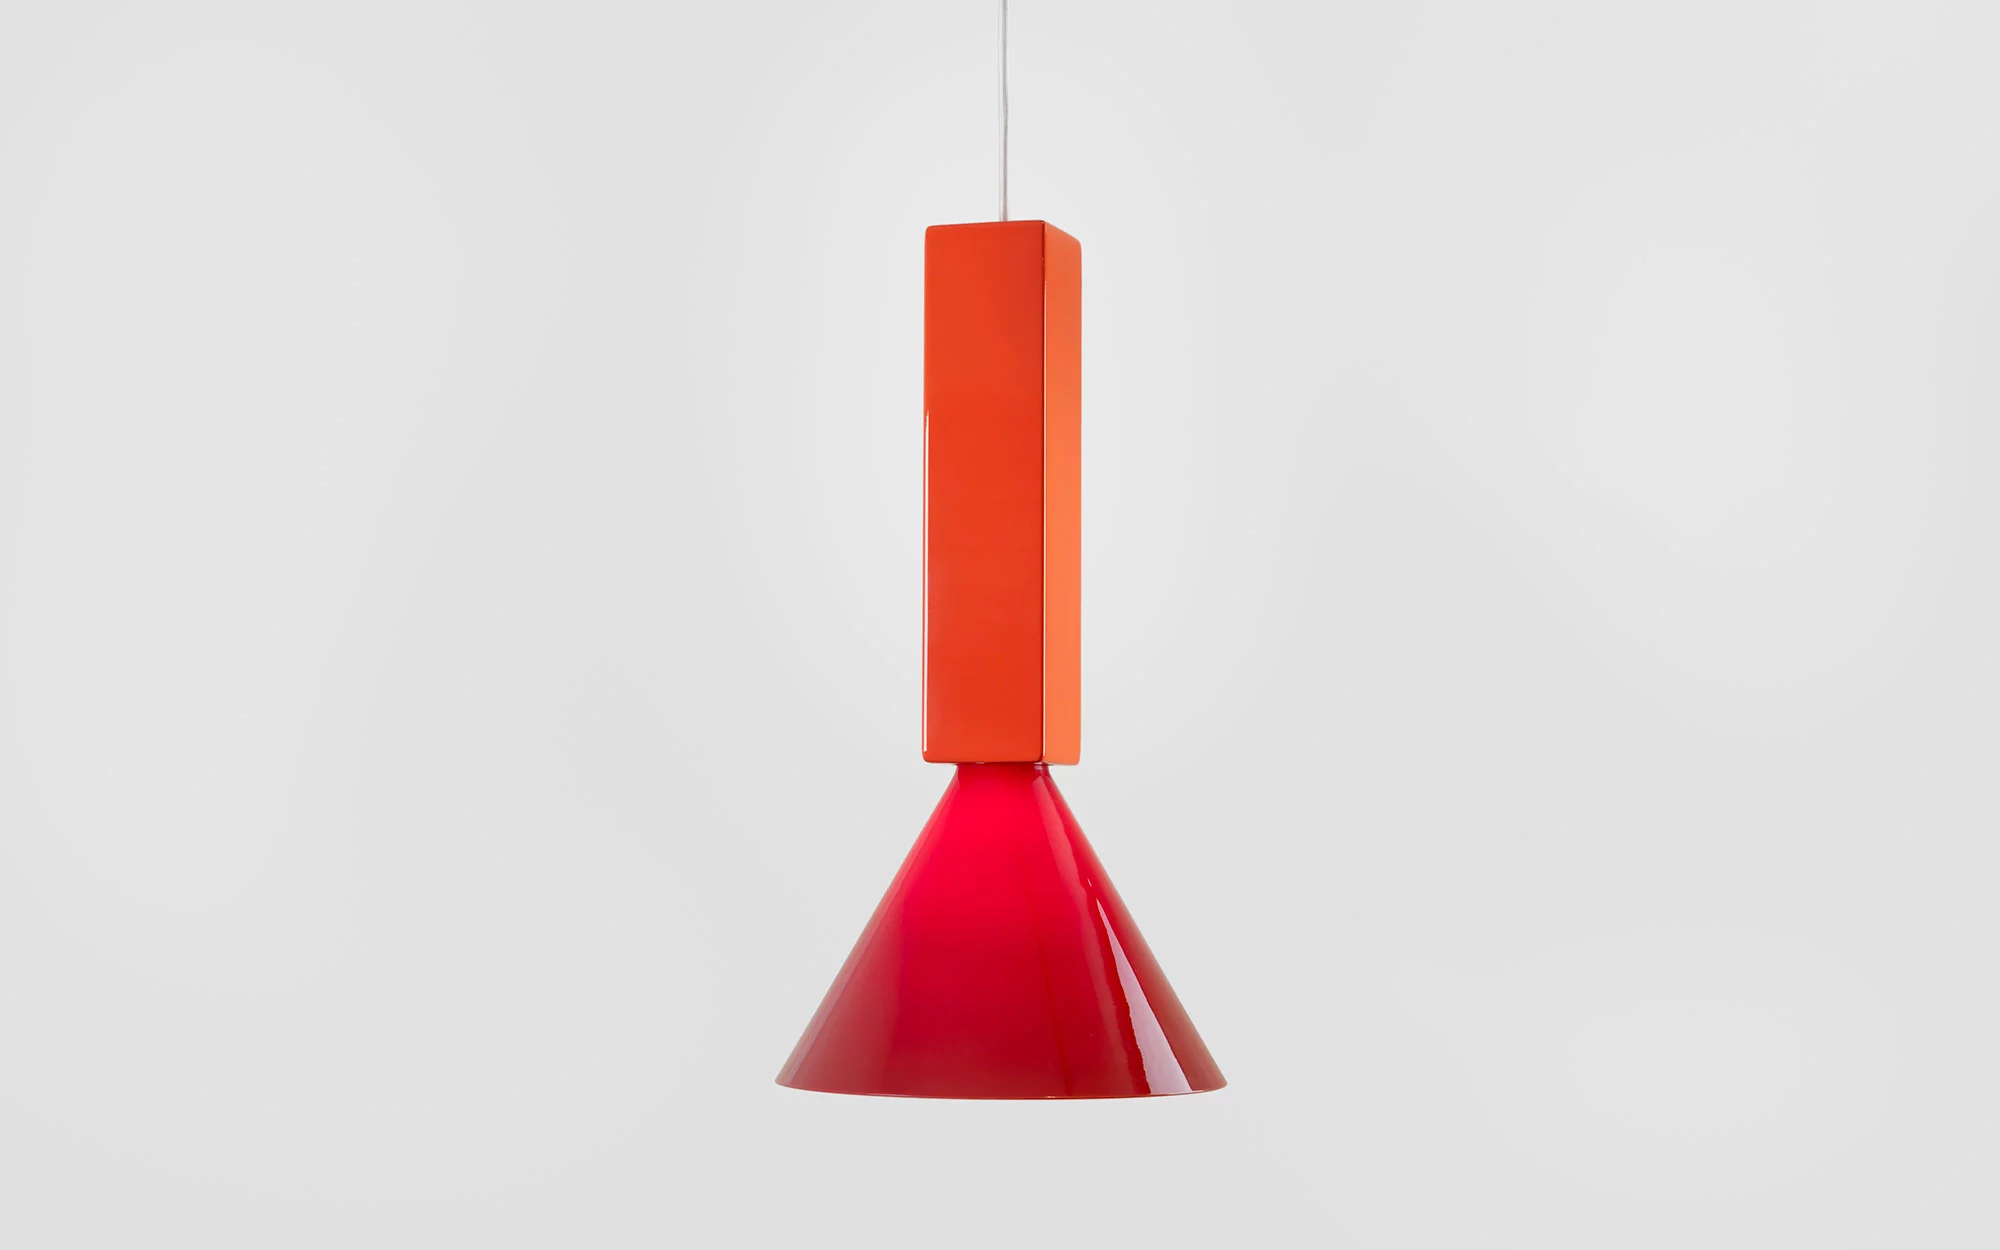 Signal C1 MONOCHROMATIC - Edward and Jay Barber and Osgerby - pendant-light - Galerie kreo